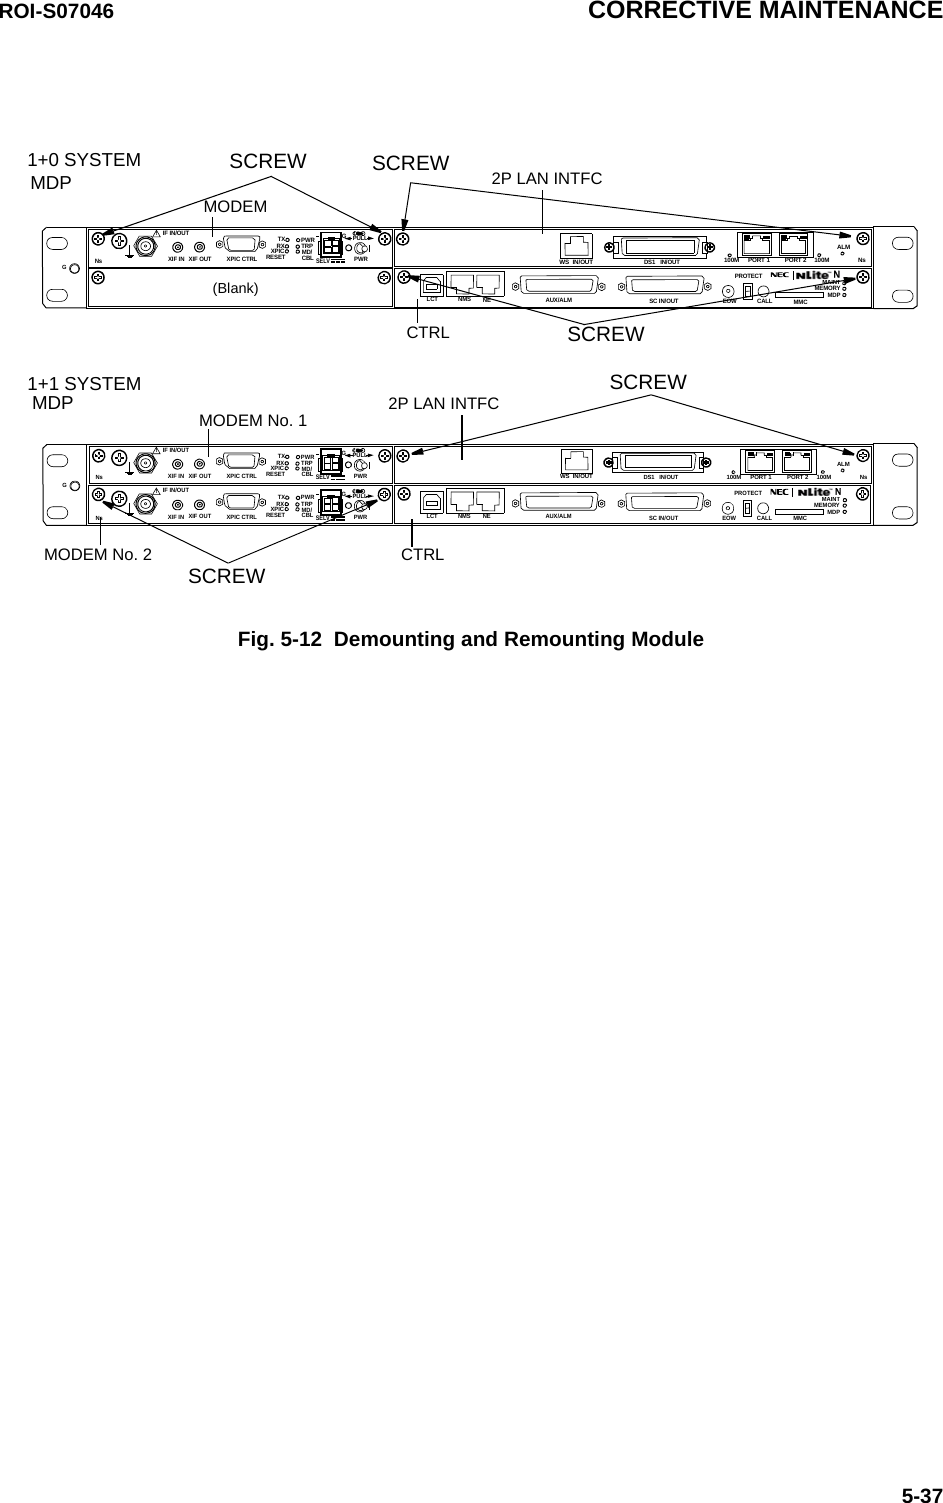 ROI-S07046 CORRECTIVE MAINTENANCE5-37Fig. 5-12  Demounting and Remounting ModuleSELV!AUX/ALMLCT NMS NE SC IN/OUT EOWPROTECTCALL MMCMAINTMEMORYMDPXIF IN XIF OUTIF IN/OUT TXRXRESETXPIC CTRL XPICPWRTRPMD/CBL PWRPULLGGALM100M PORT 1 PORT 2 100M NsNs DS1   IN/OUTWS  IN/OUTN1+0 SYSTEM1+1 SYSTEM      MDPSCREWSCREW     MDPSCREWSCREWMODEMCTRLMODEM No. 1MODEM No. 2 CTRL(Blank)2P LAN INTFCSCREW2P LAN INTFCSELV!AUX/ALMLCT NMS NE SC IN/OUT EOWPROTECTCALL MMCMAINTMEMORYMDPXIF IN XIF OUTIF IN/OUT TXRXRESETXPIC CTRL XPICPWRTRPMD/CBL PWRPULLGSELV!XIF IN XIF OUTIF IN/OUT TXRXRESETXPIC CTRL XPICPWRTRPMD/CBL PWRPULLGGALM100M PORT 1 PORT 2 100MNsNsWS  IN/OUT NsNDS1   IN/OUT